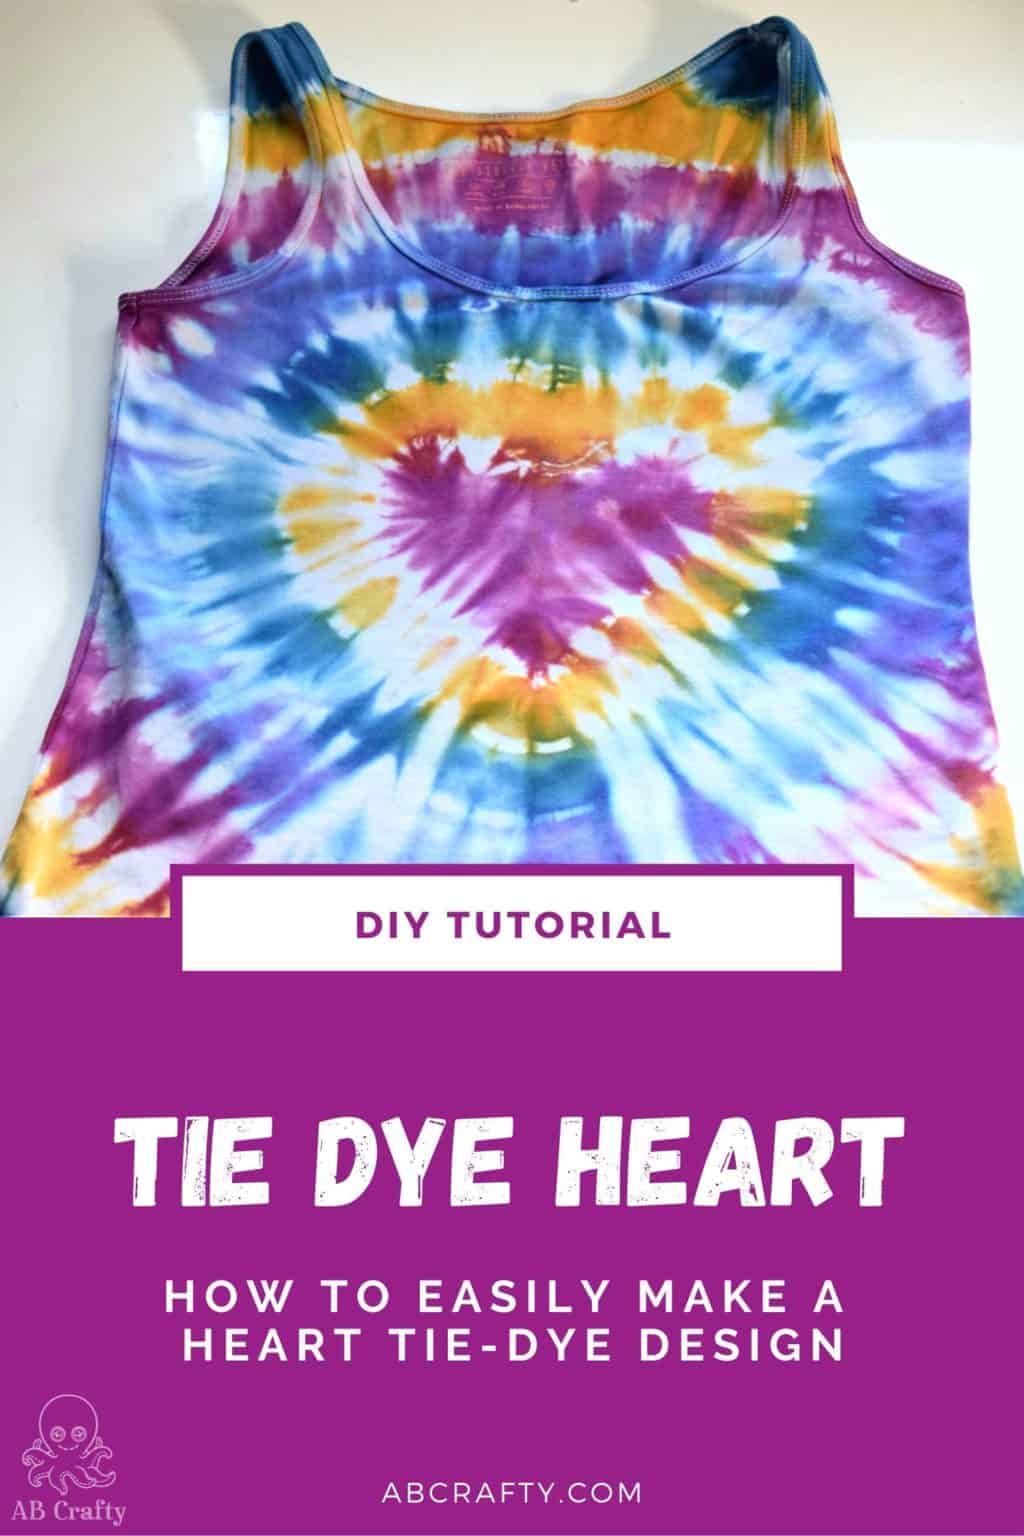 finished tie dye tank top with a rainbow heart tie dye pattern and the title "DIY tutorial - tie dye heart - how to easily make a heart tie-dye design, abcrafty.com"